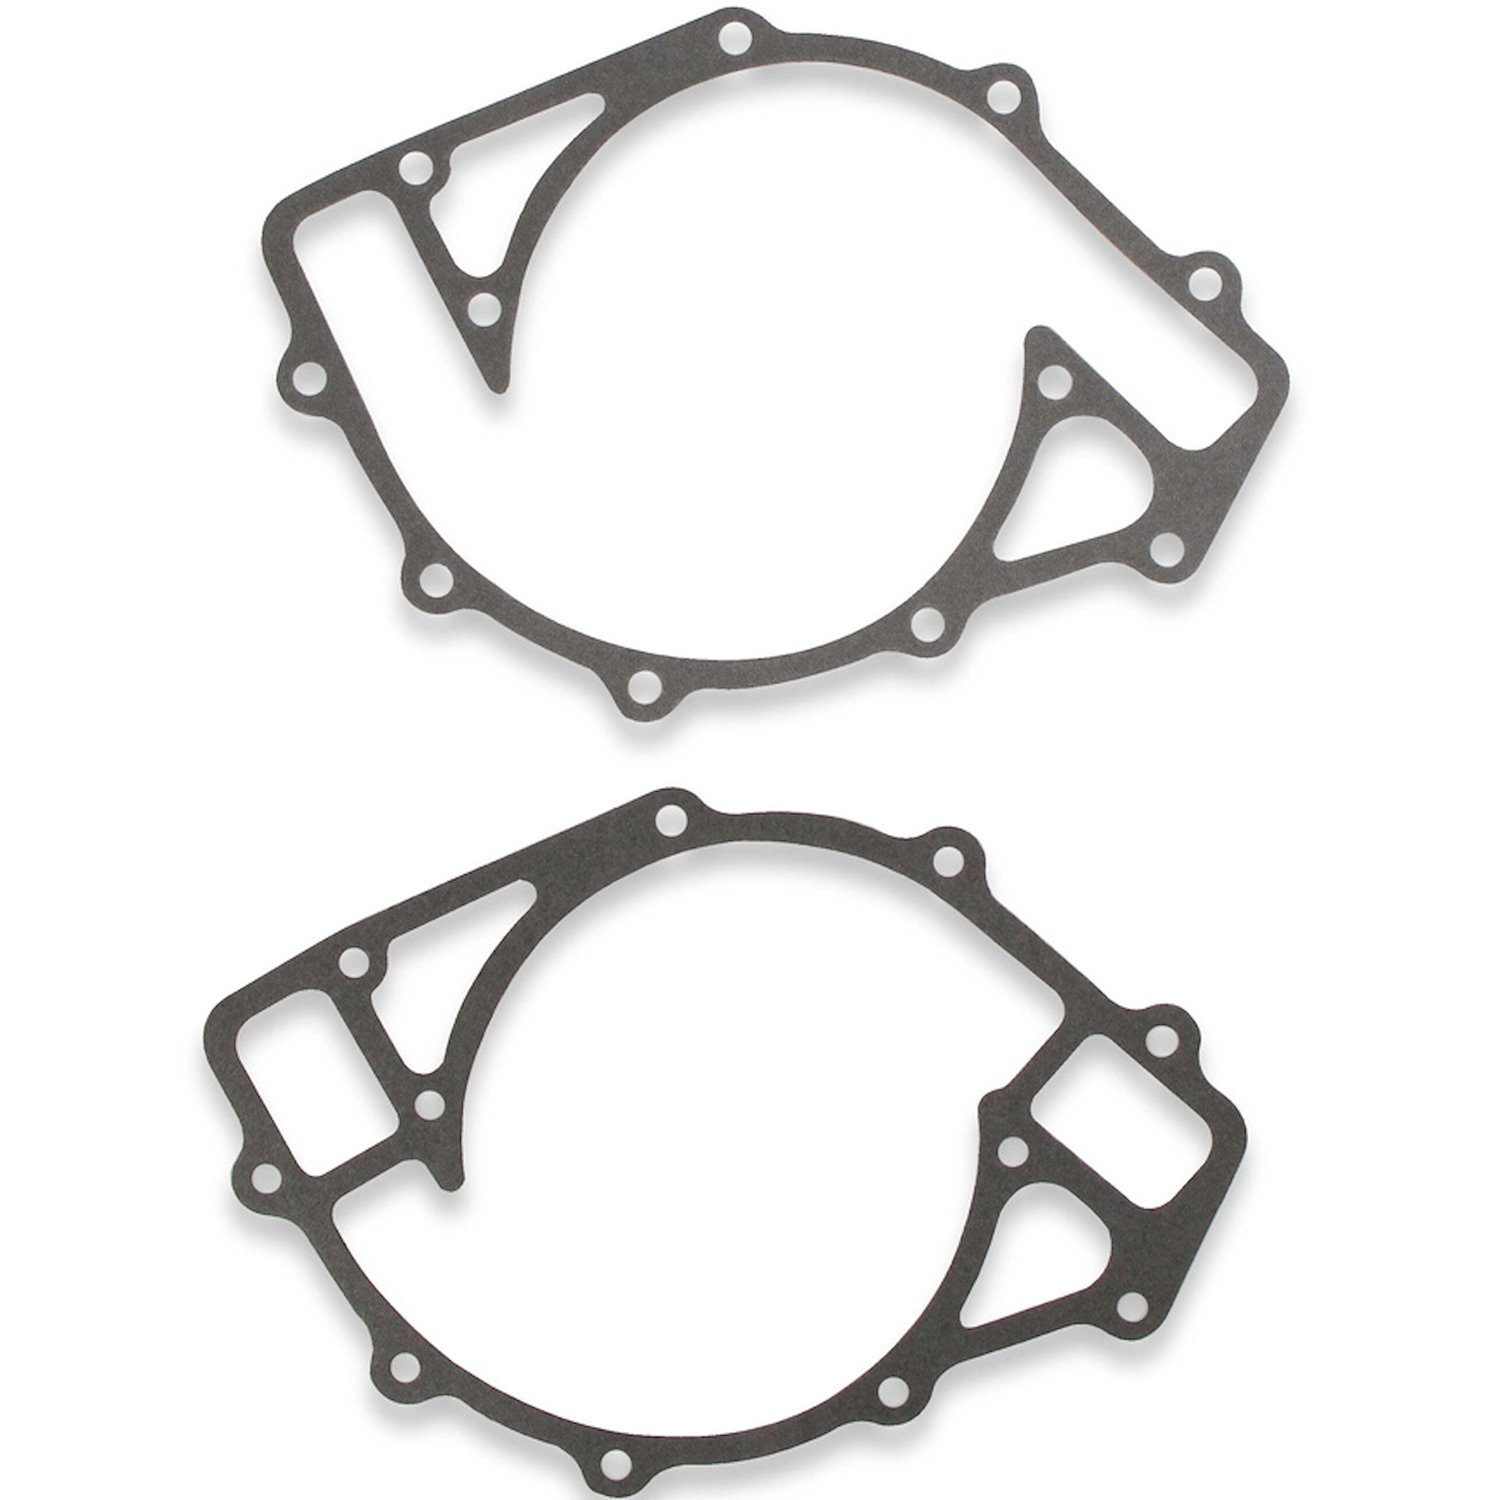 Water Pump Gaskets for Big Block Ford 429, 460 ci